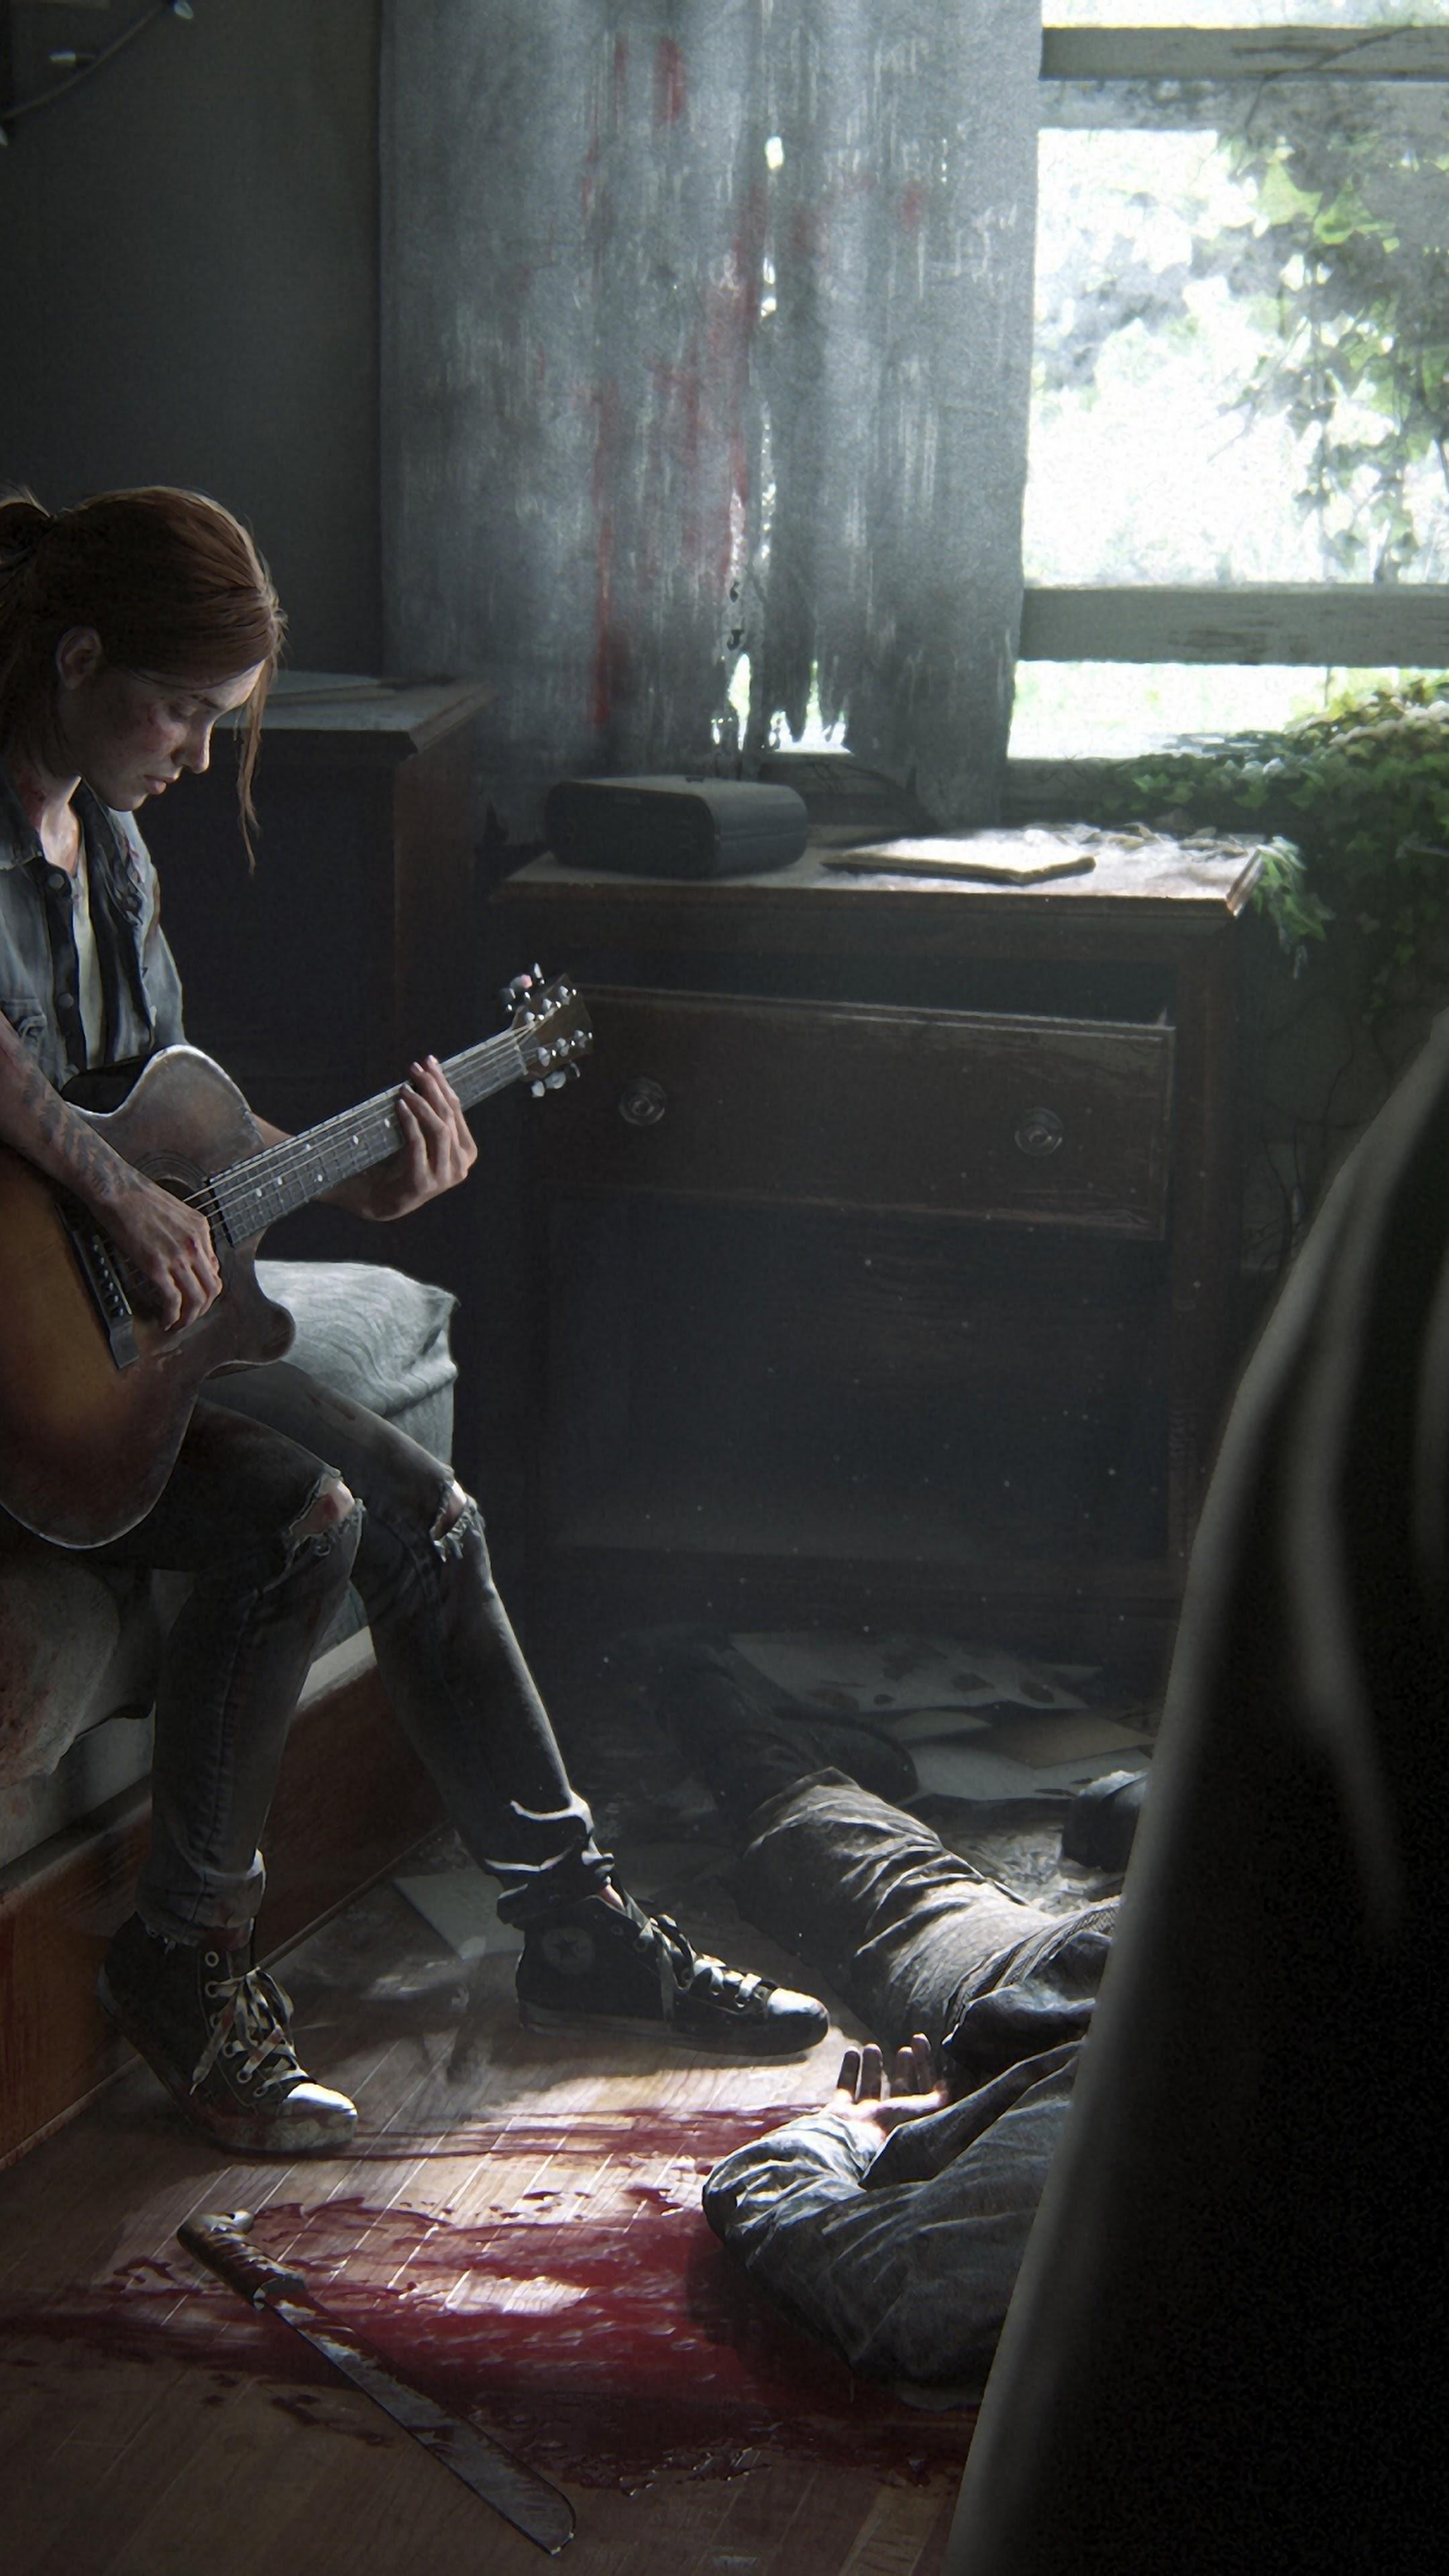 Last of Us 2 Phone Wallpapers - Top Free Last of Us 2 Phone Backgrounds -  WallpaperAccess